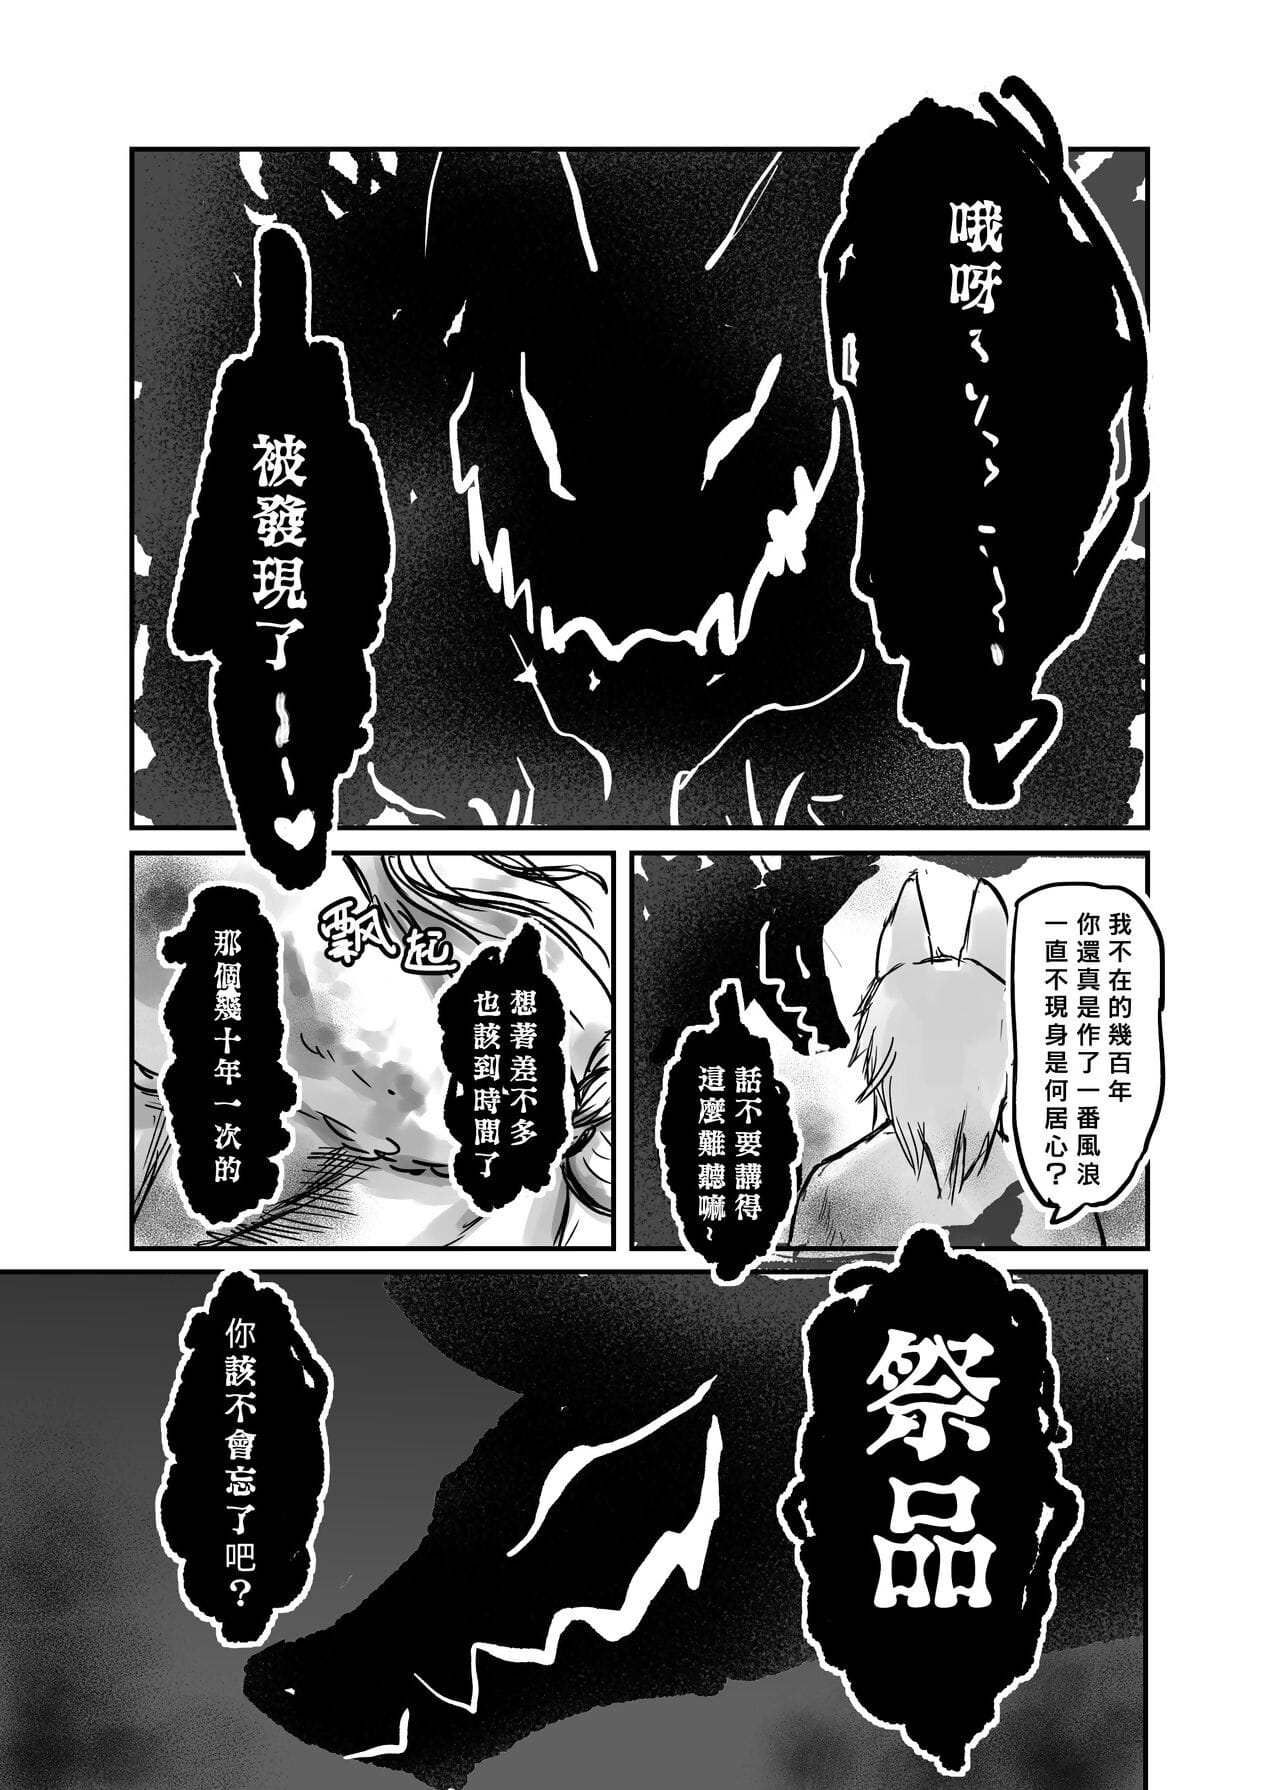 （the visitante 他乡之人 by：鬼流 parte 2 page 1